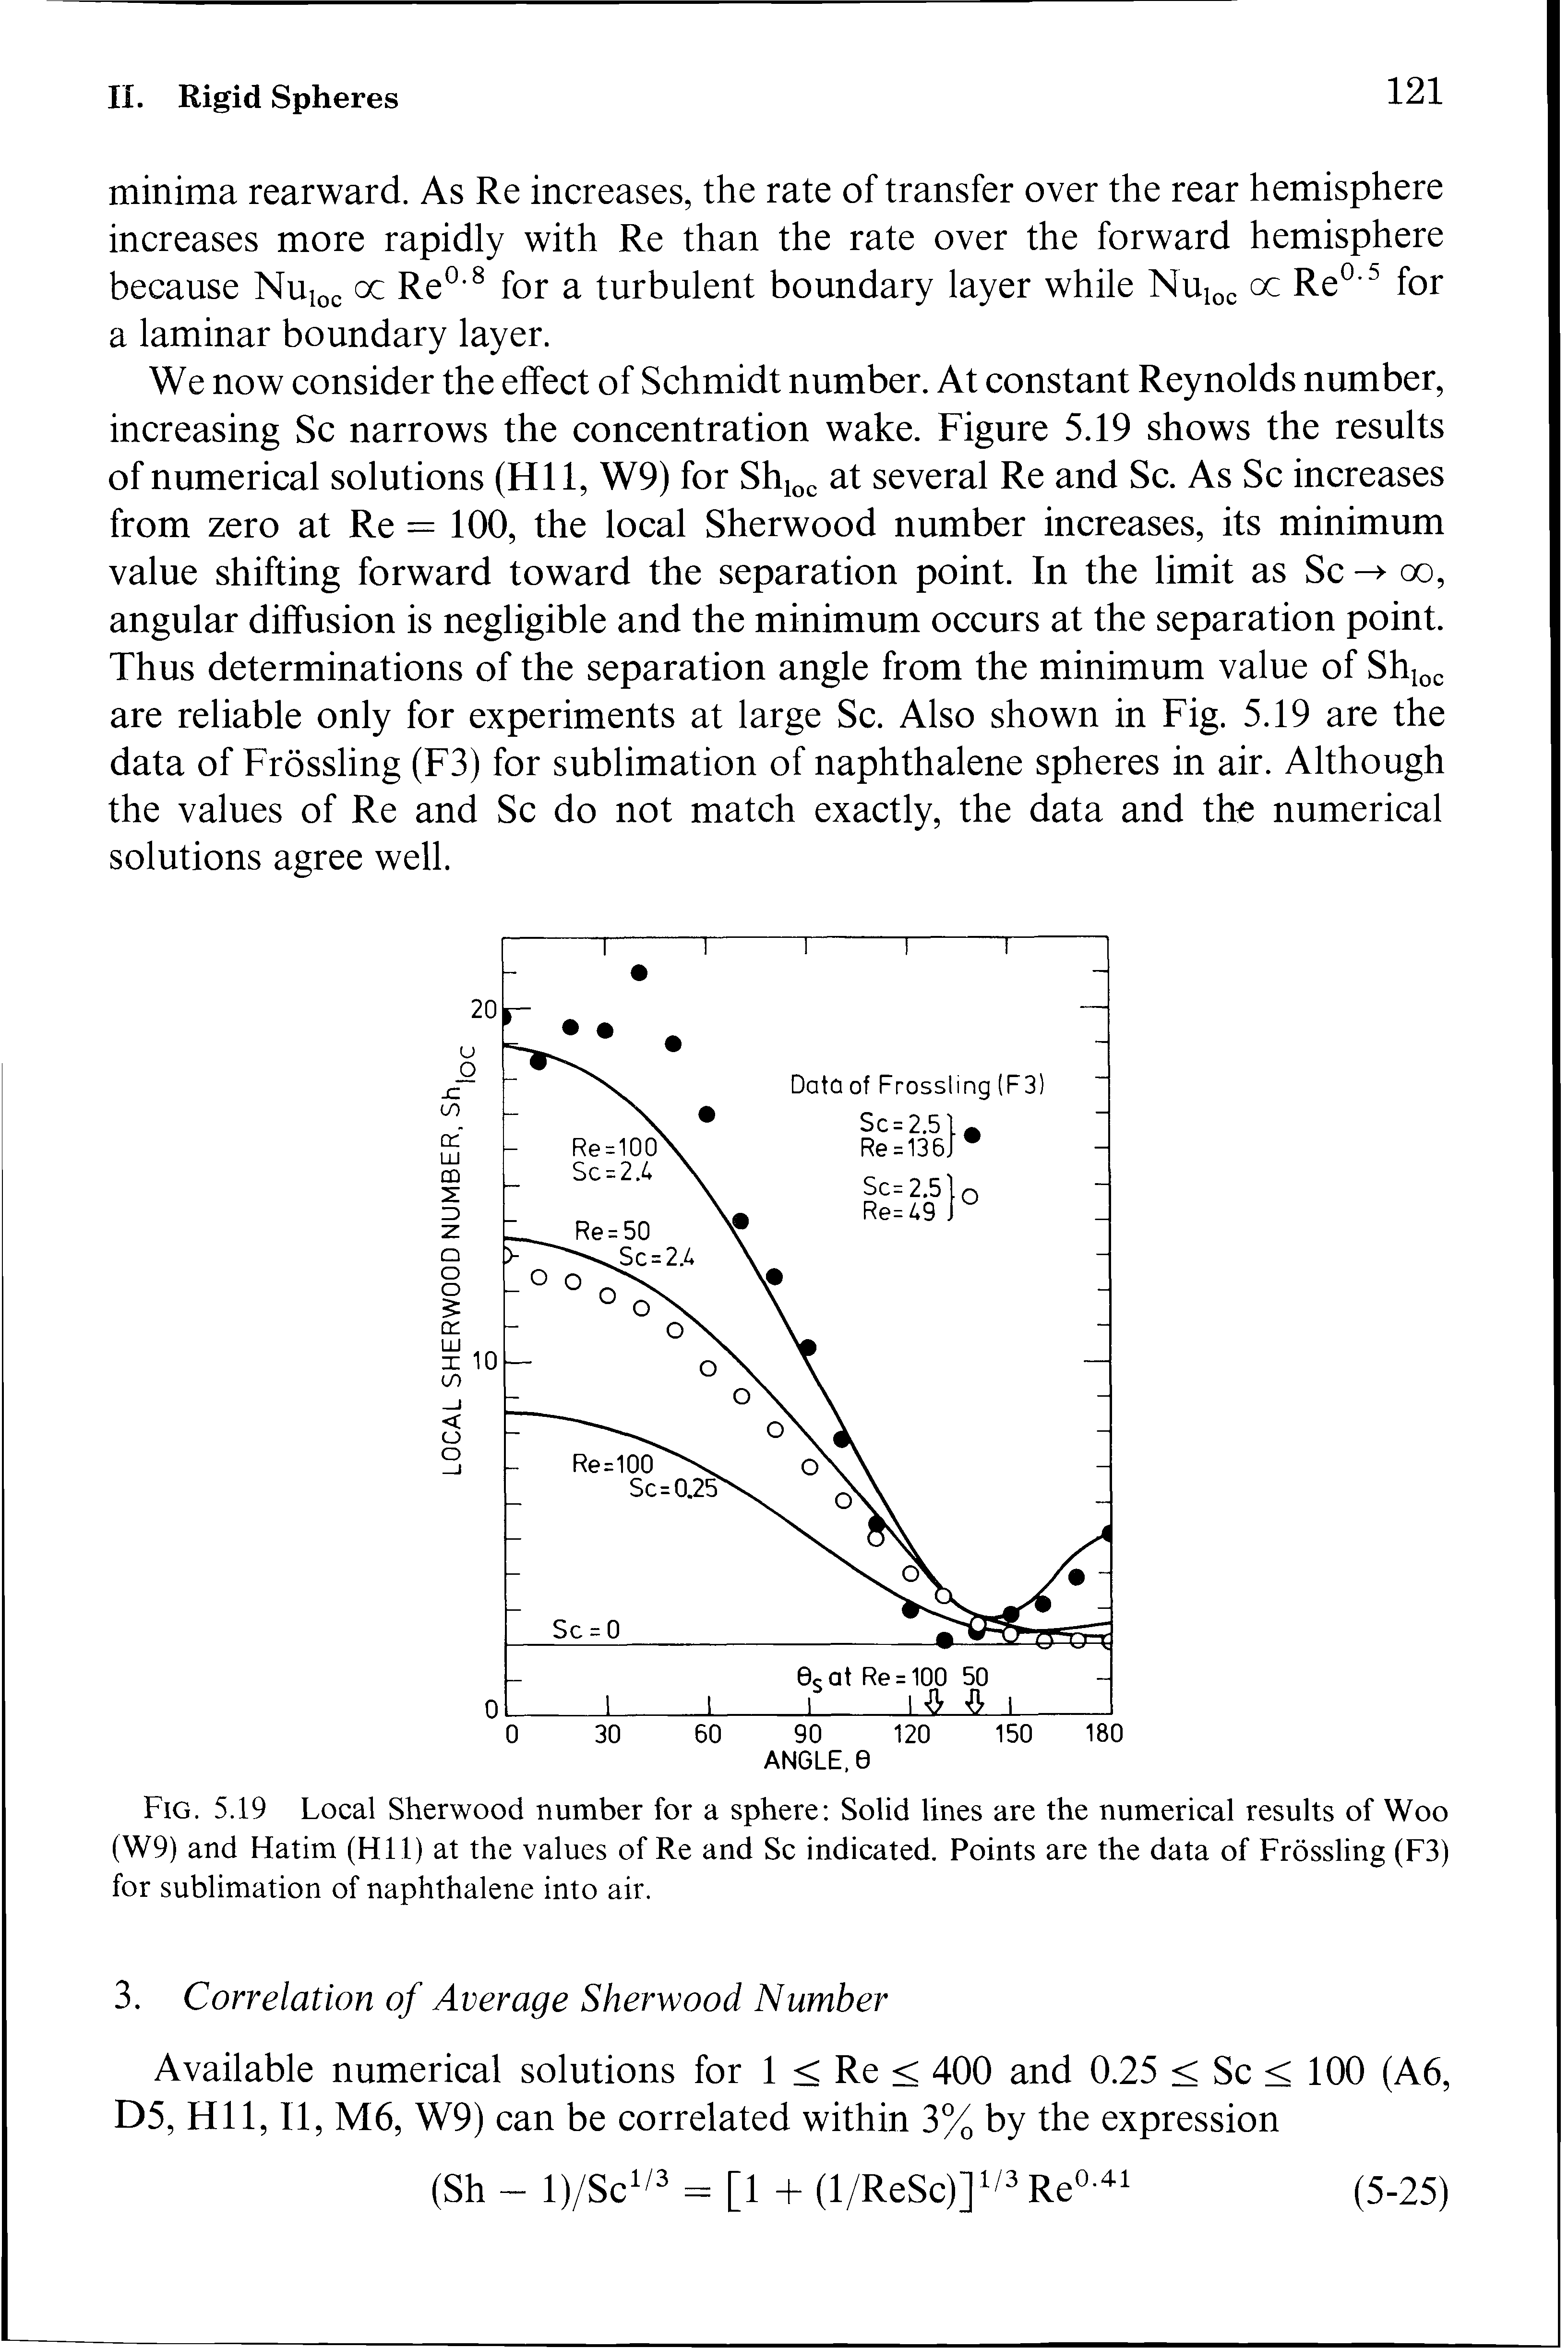 Fig. 5.19 Local Sherwood number for a sphere Solid lines are the numerical results of Woo (W9) and Hatim (Hll) at the values of Re and Sc indicated. Points are the data of Frossling (F3) for sublimation of naphthalene into air.